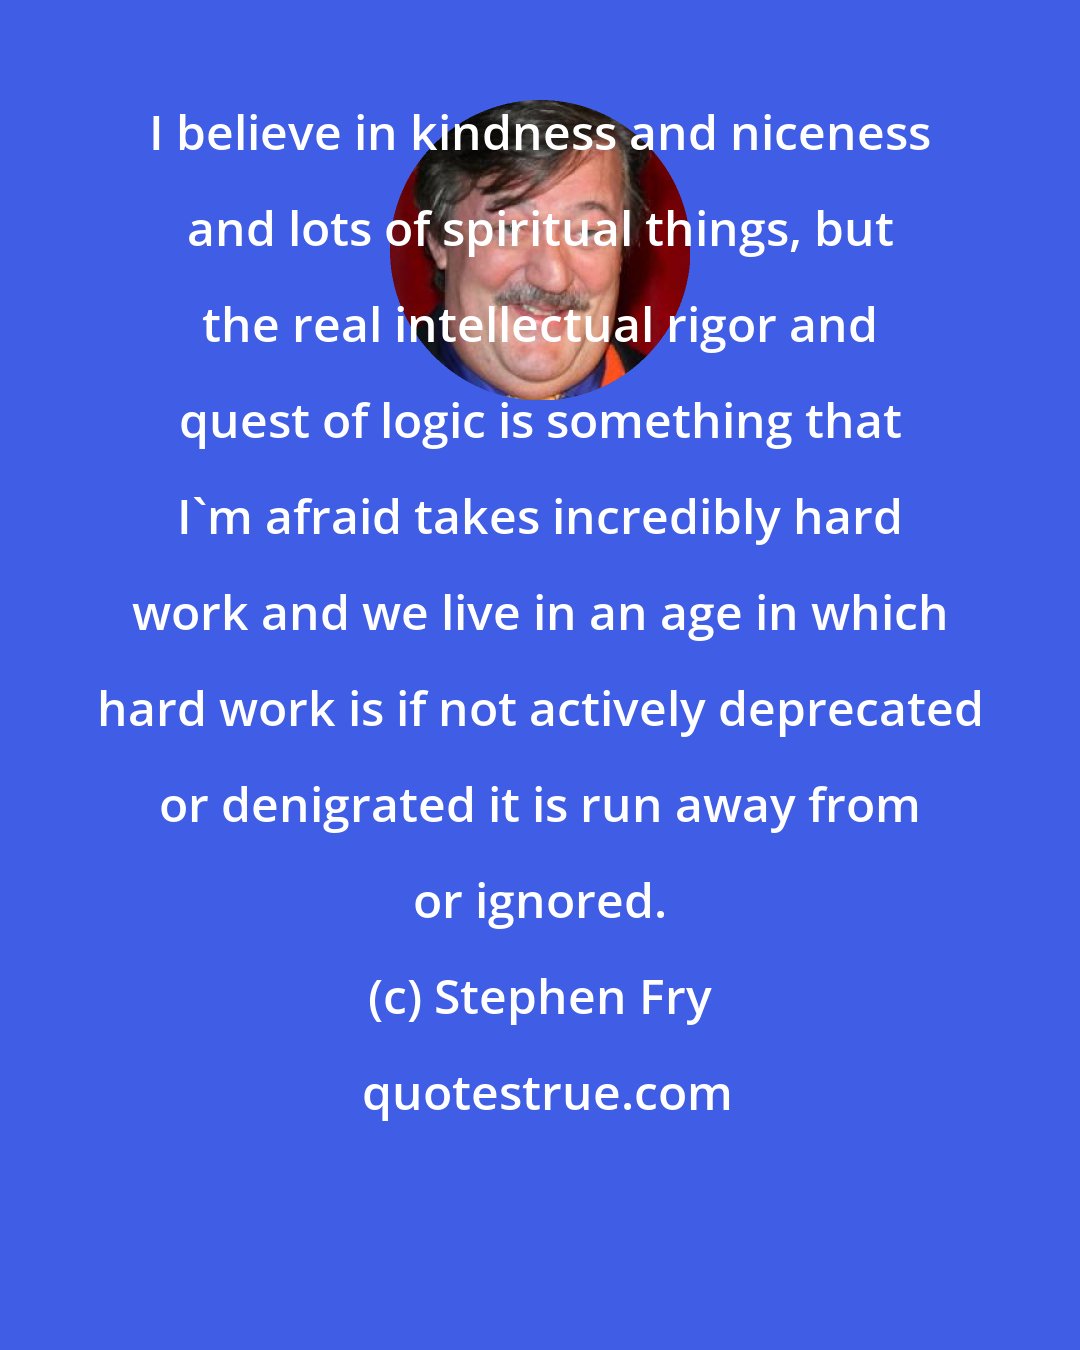 Stephen Fry: I believe in kindness and niceness and lots of spiritual things, but the real intellectual rigor and quest of logic is something that I'm afraid takes incredibly hard work and we live in an age in which hard work is if not actively deprecated or denigrated it is run away from or ignored.